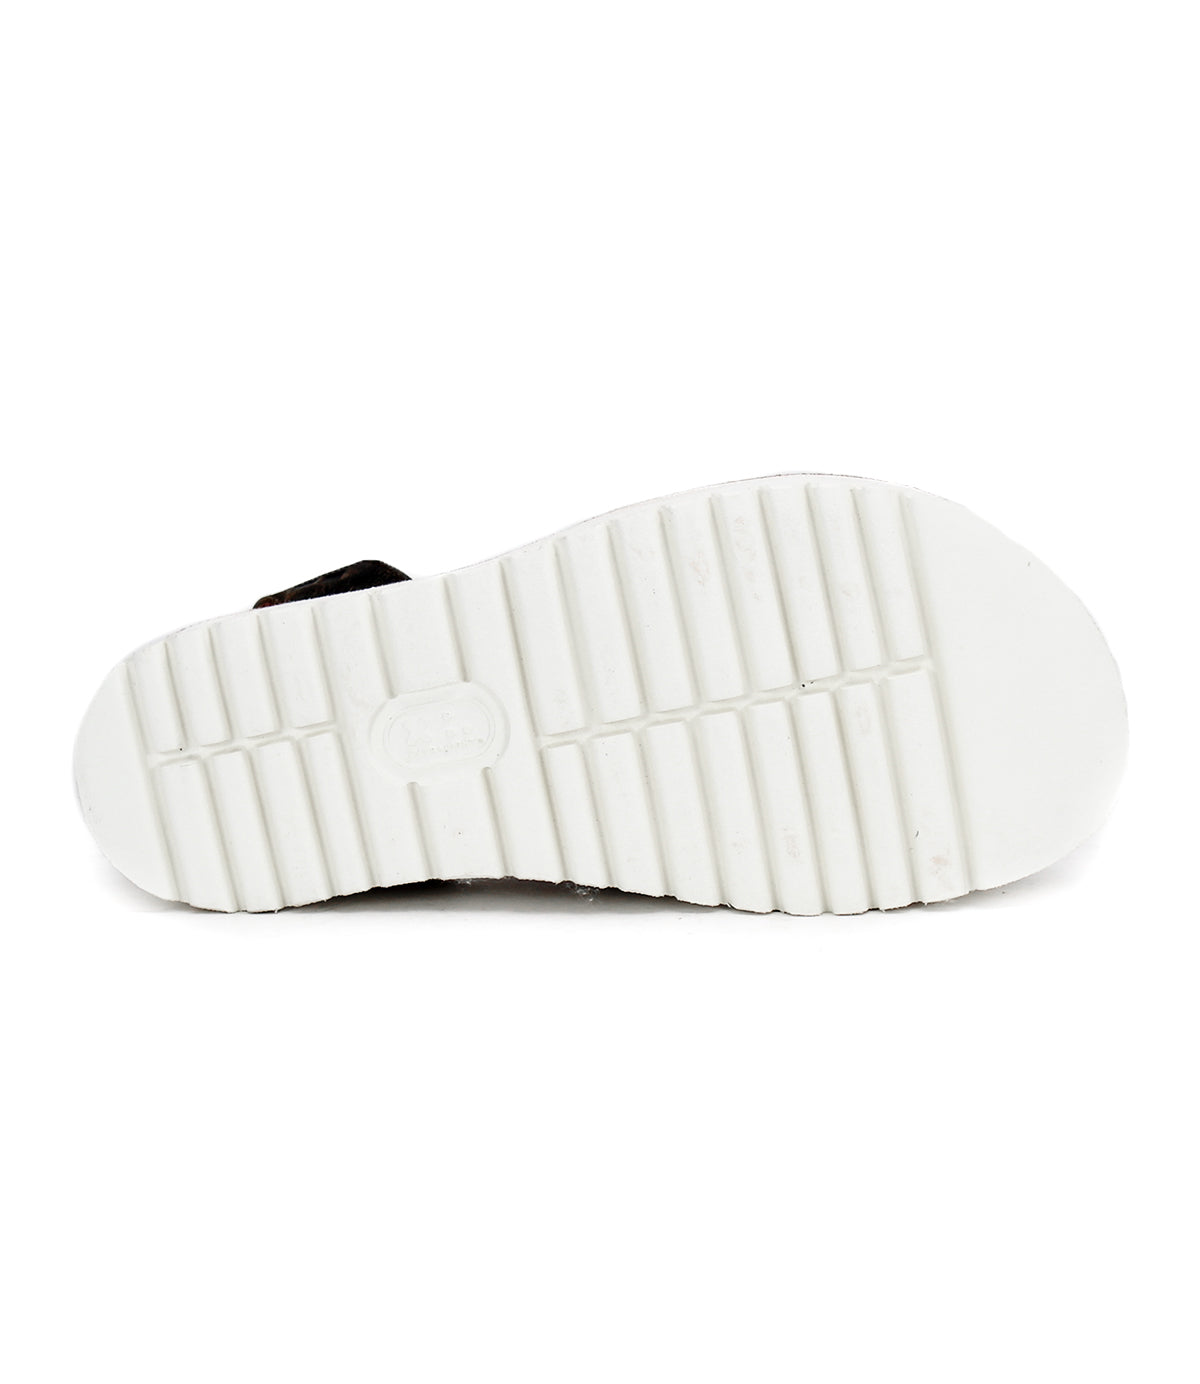 A pair of white sneakers with black soles on a white background, featuring shock absorbing Bed Stu Clancy technology.